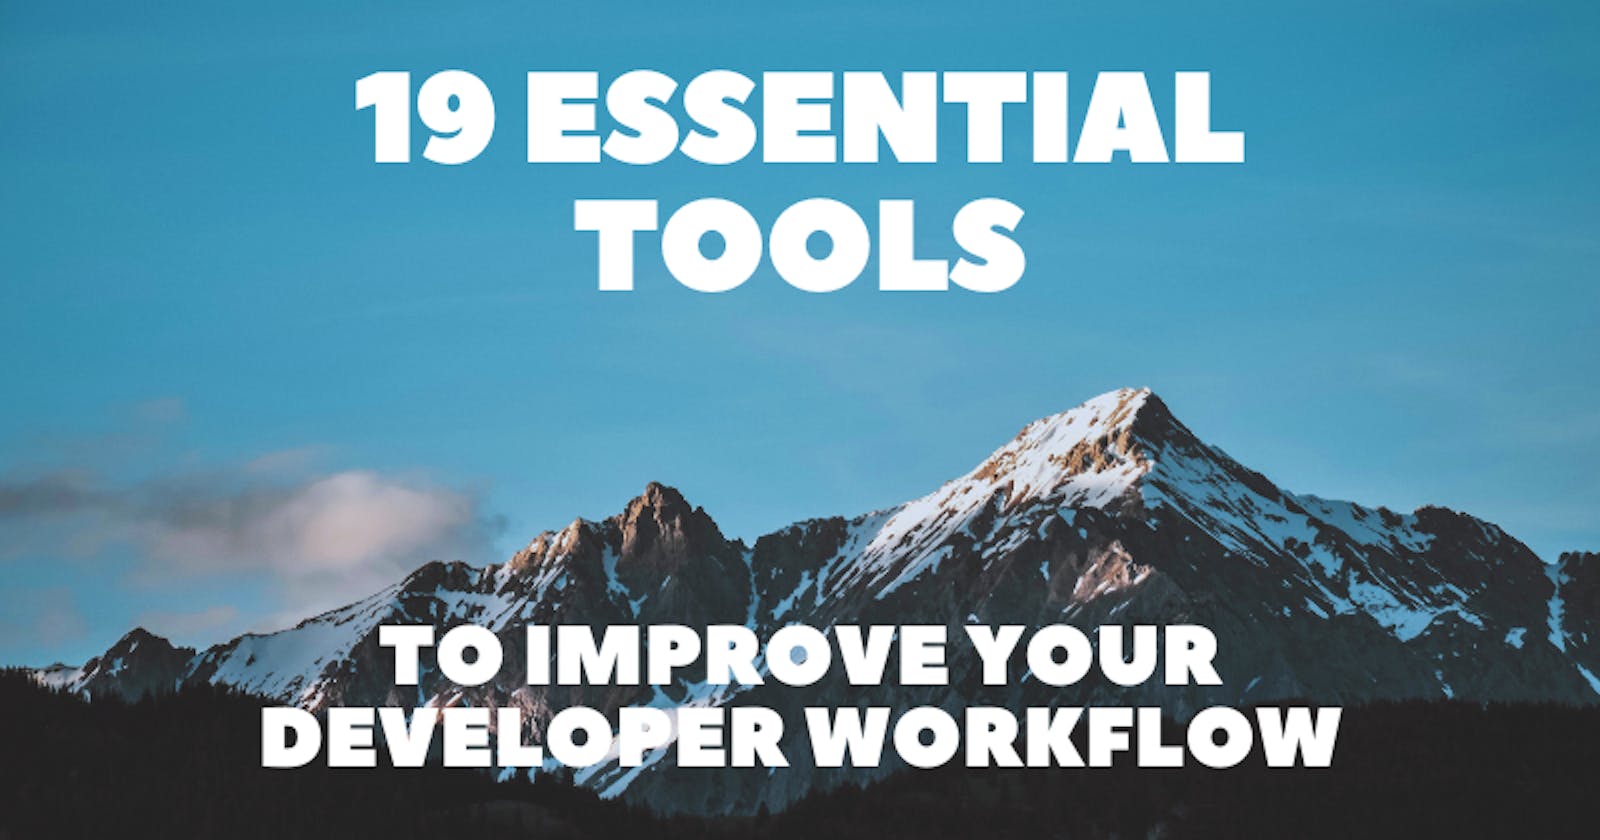 19 Essential Tools to Improve Your Developer Workflow 👍💯